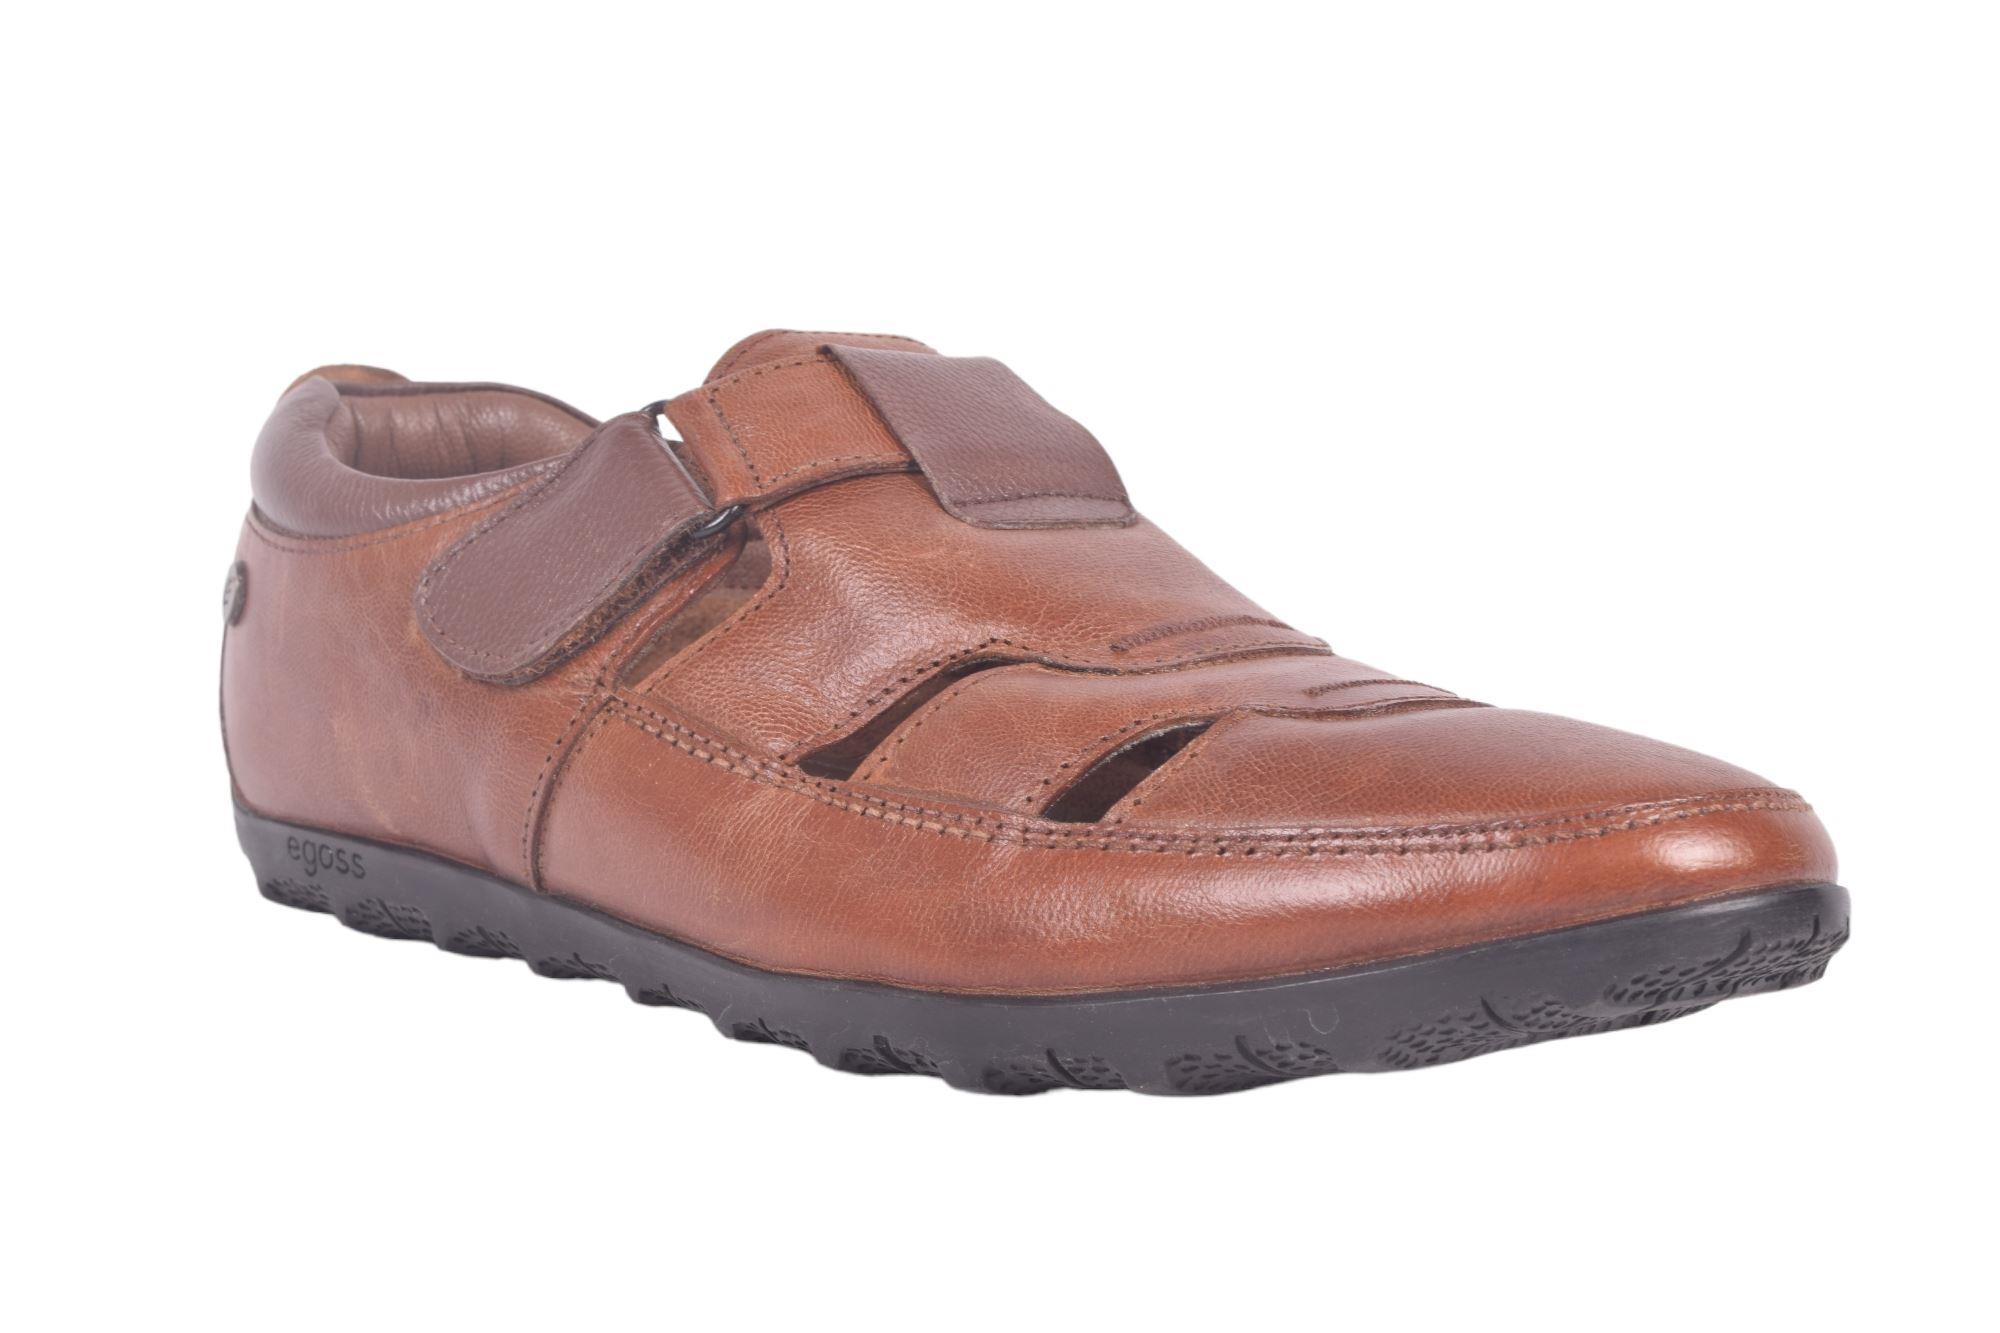 Coolsteps shoes Men's Brown Synthetic Leather Velcro Casual Sandals